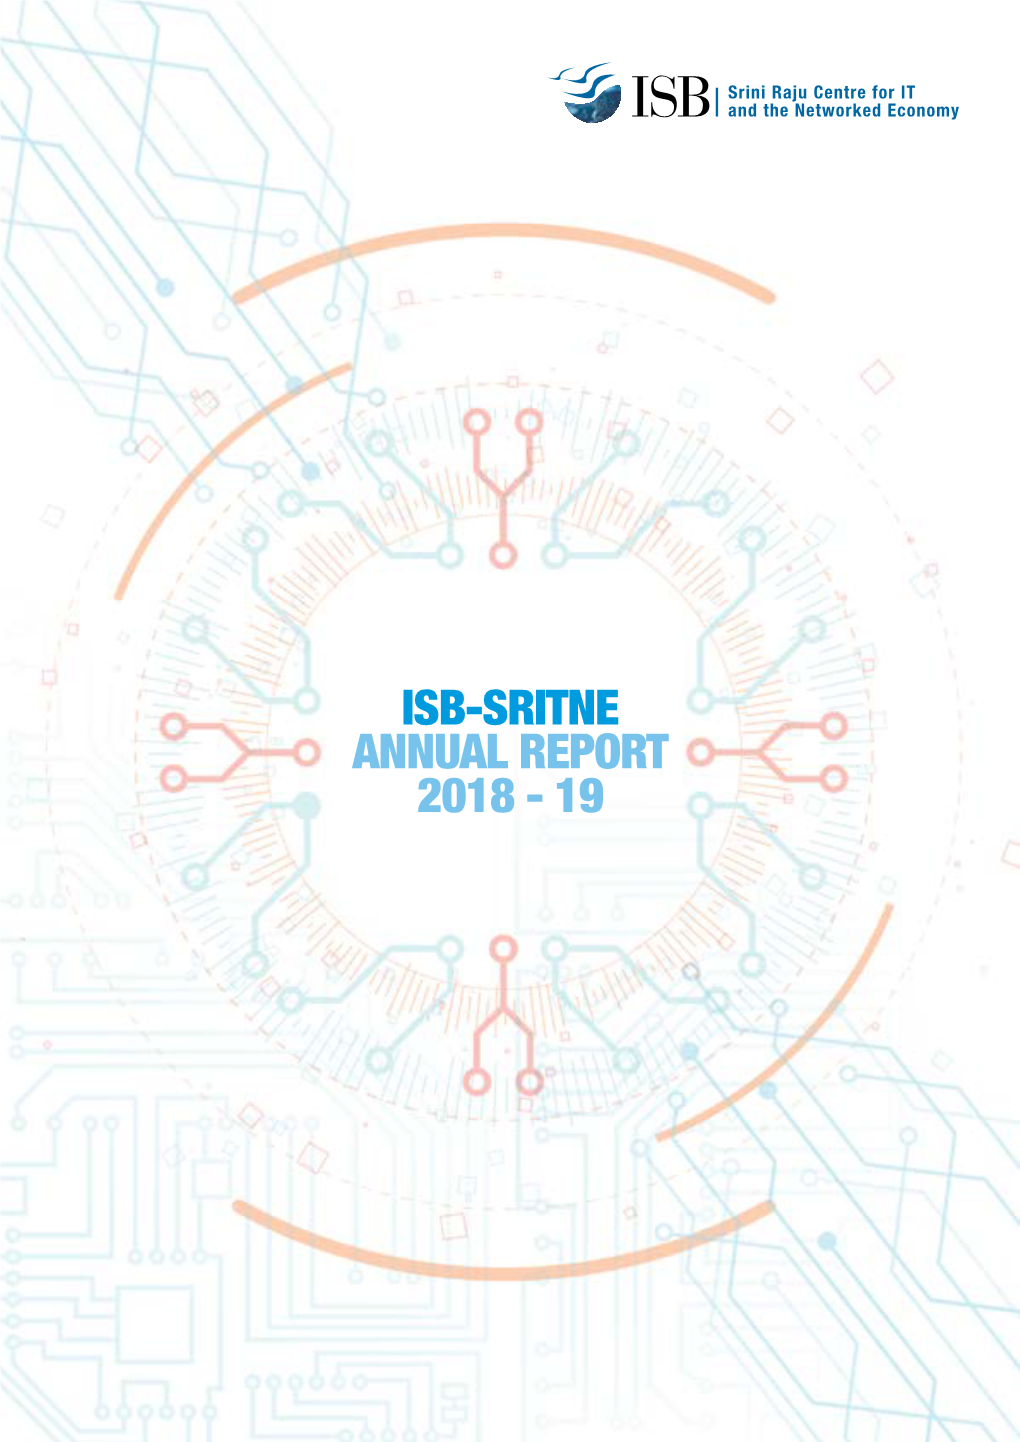 ISB-SRITNE ANNUAL REPORT 2018 - 19 Message from Benefactor